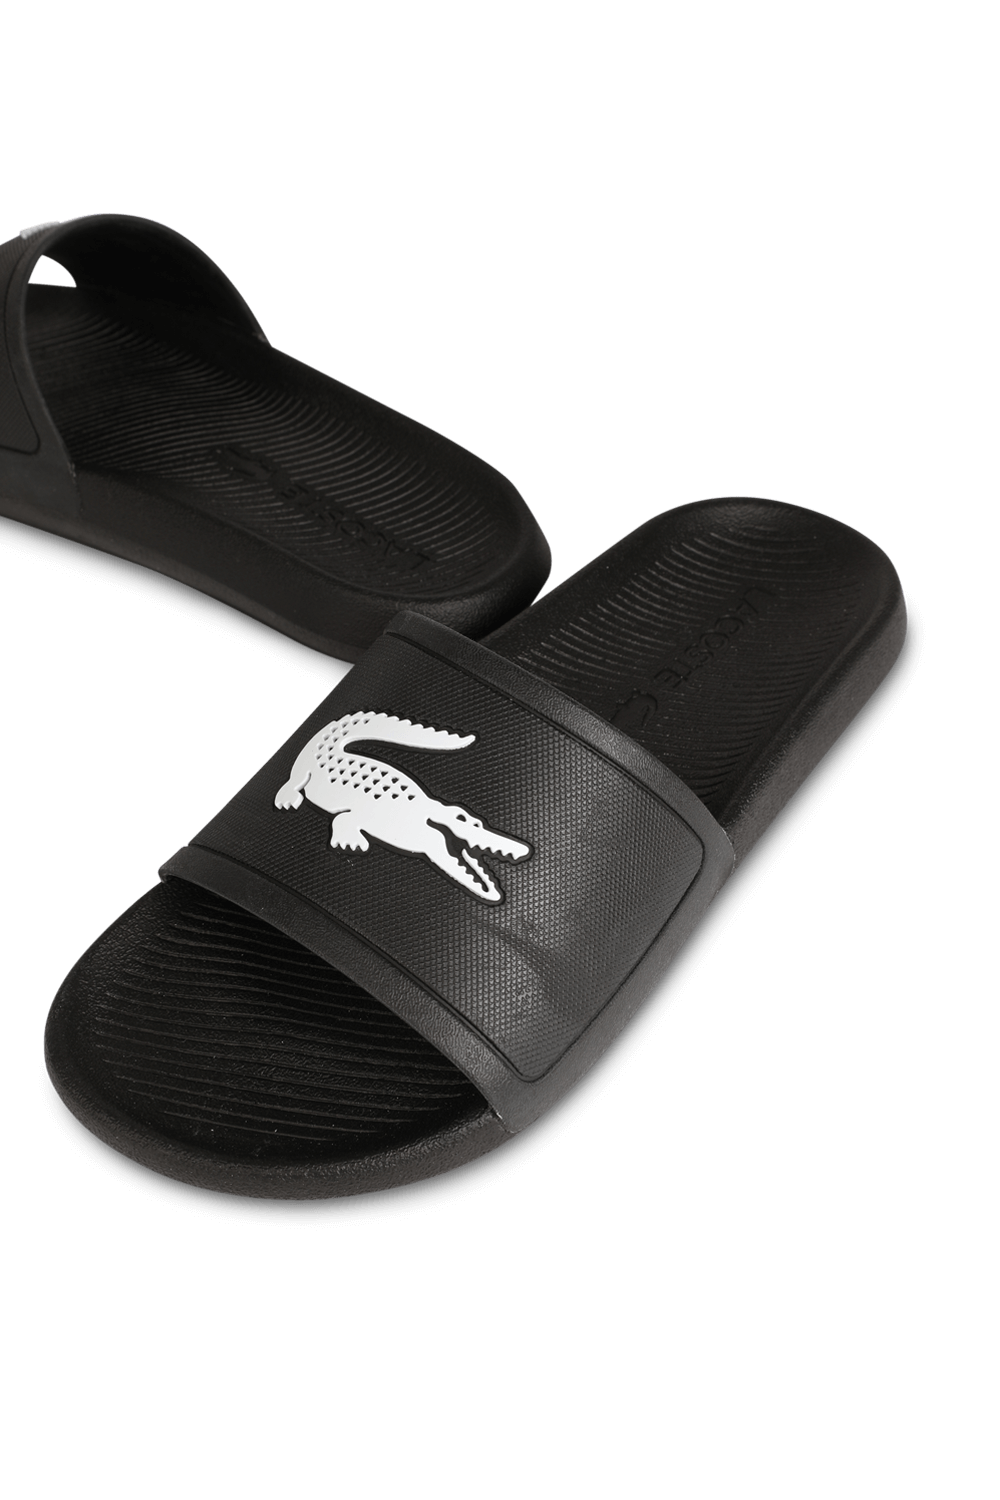 Croco Slides In Black And White LACOSTE